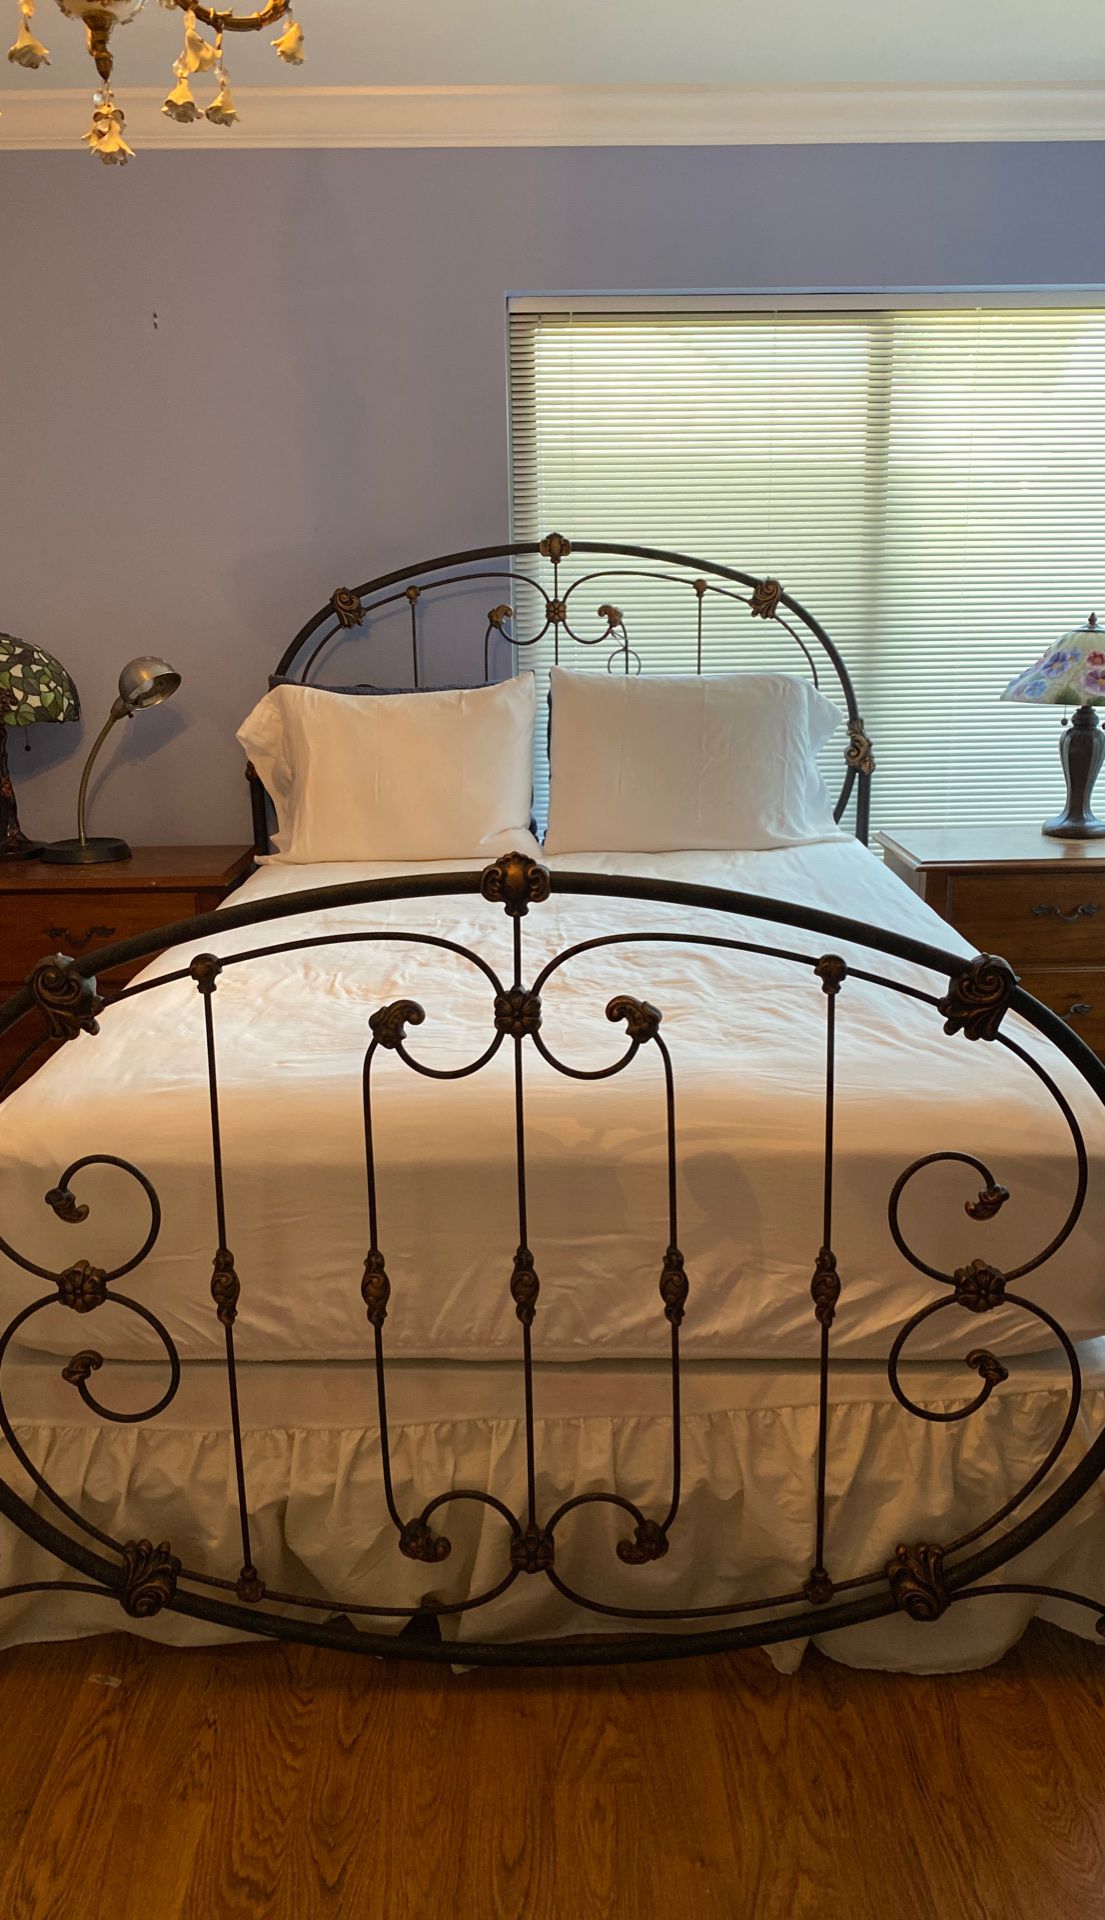 Wrought Iron queen bed and nightstands and chest. Items sold together or separately.